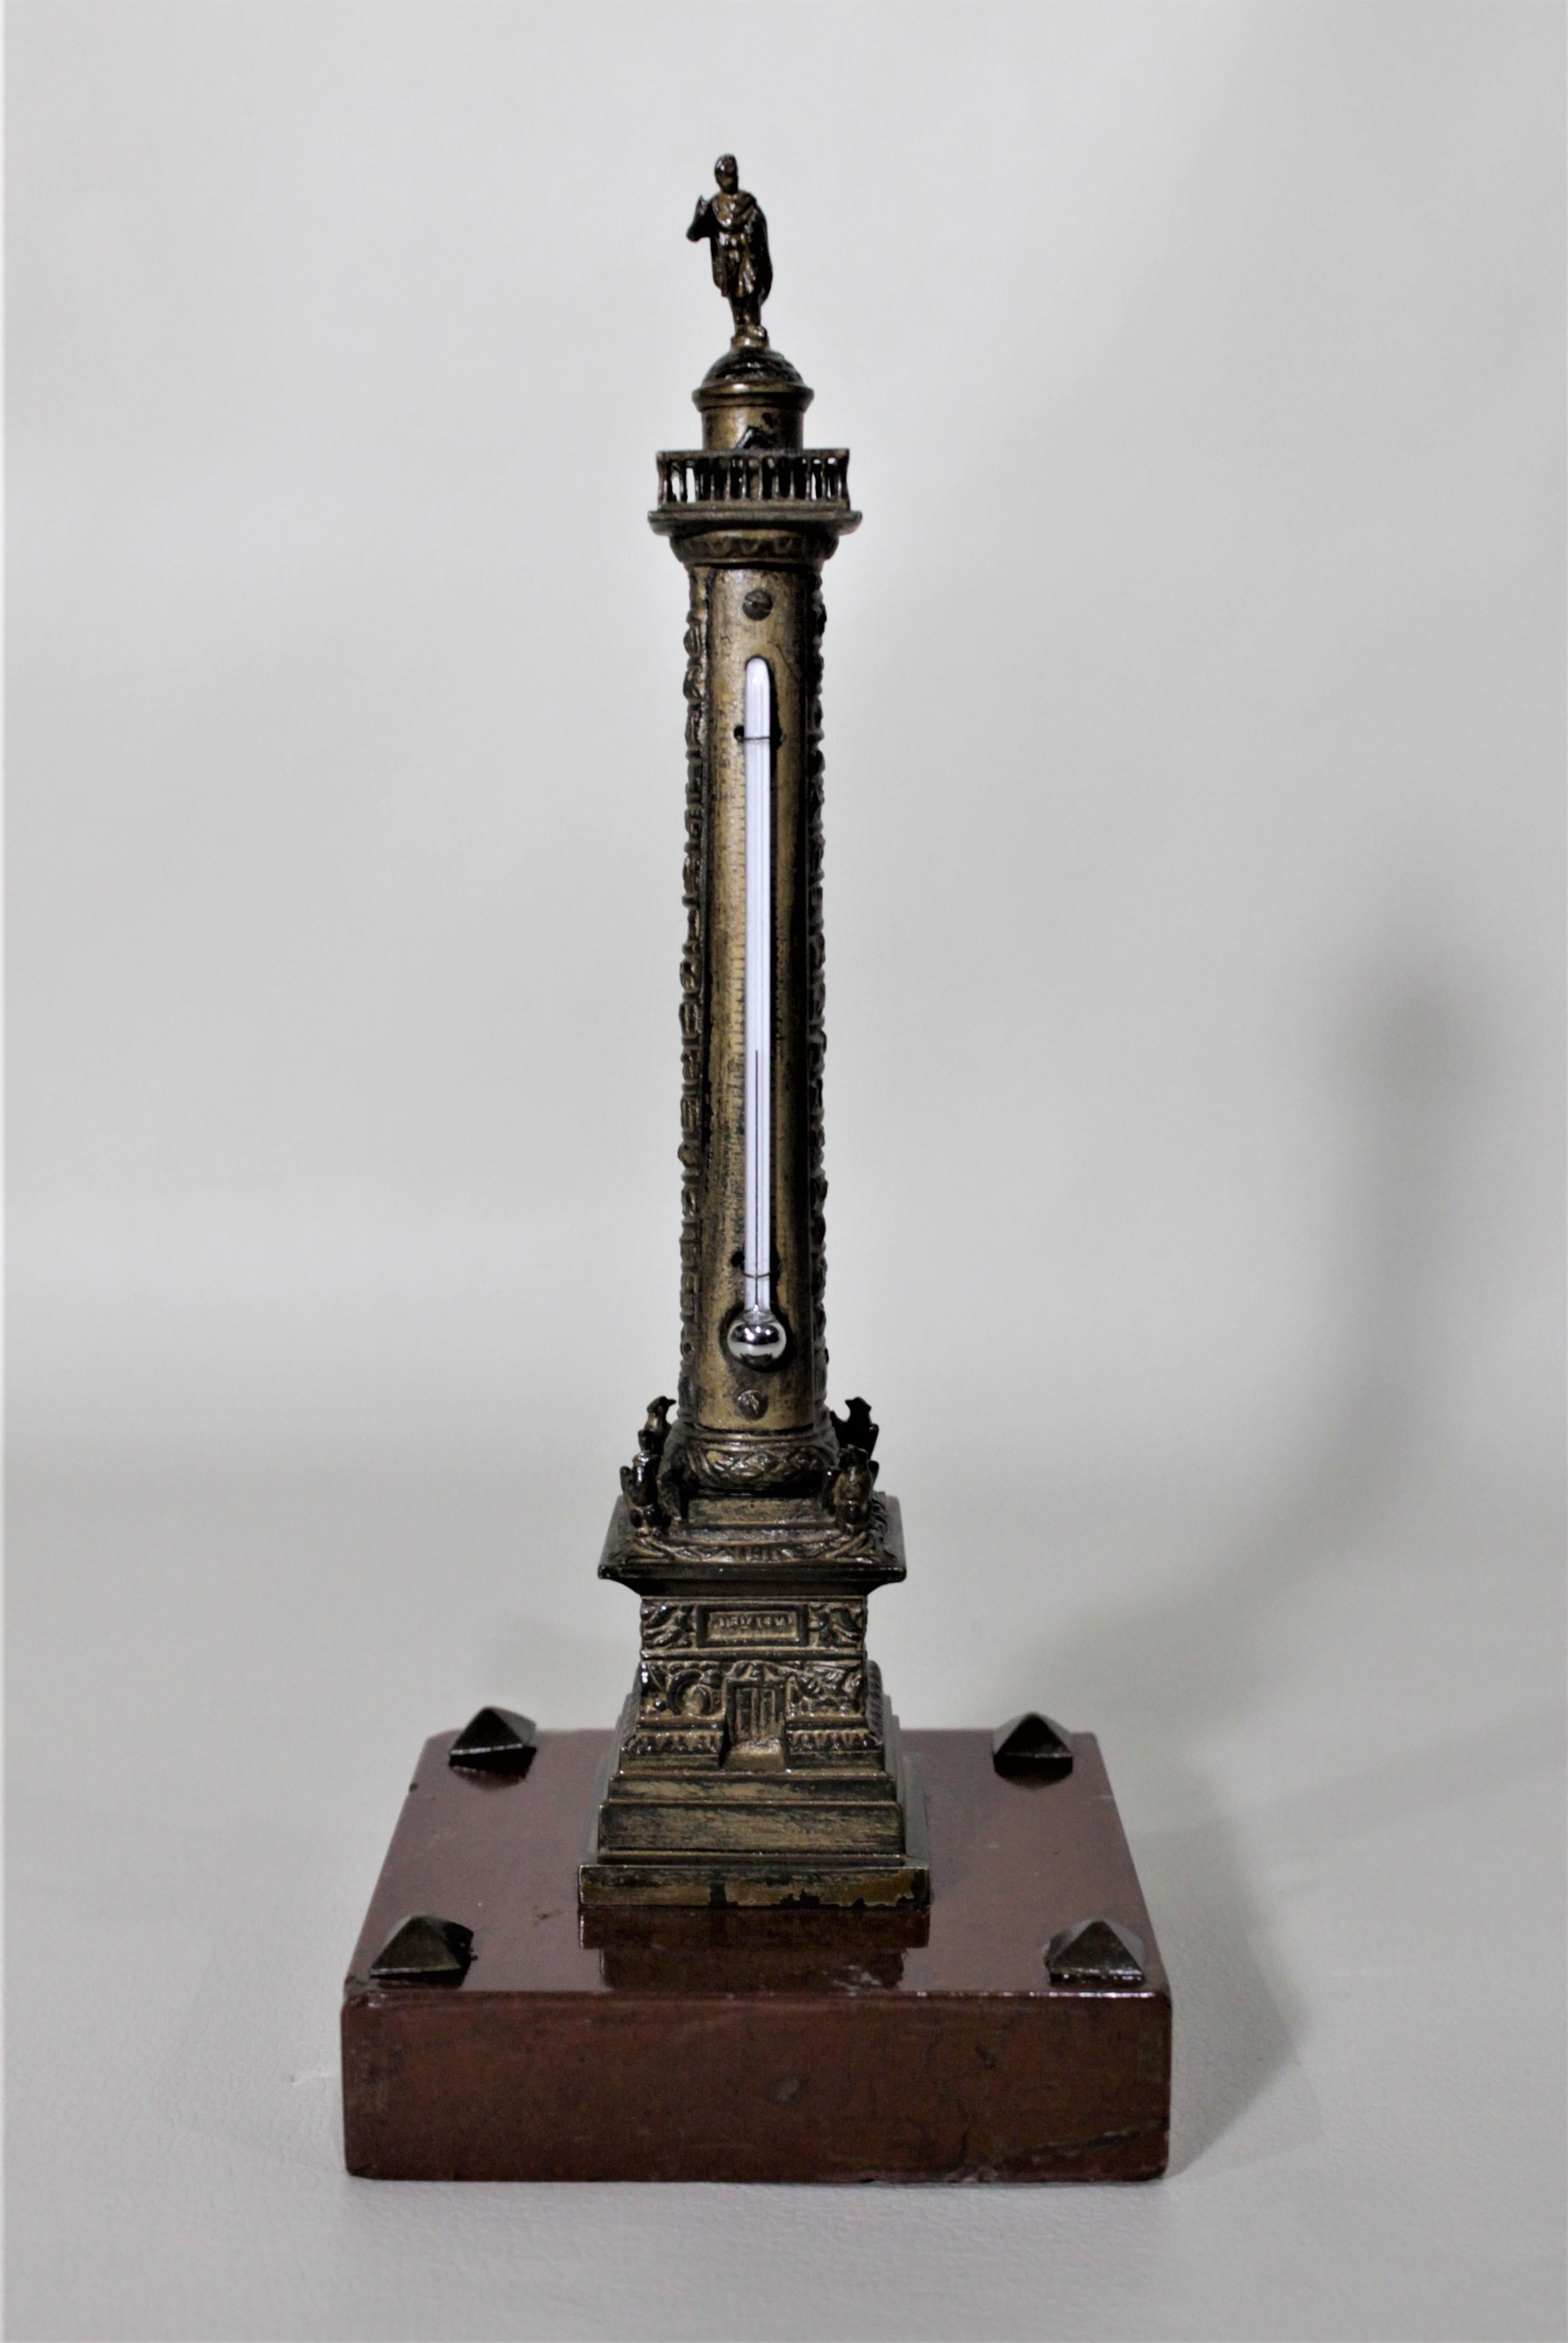 This miniature cast bronze architectural desk thermometer sculpture of a European monument dates to the 19th century to commemorate one of the Grand Tours of Europe. There is no foundry mark noted, but this bronze is presumed to have been cast in